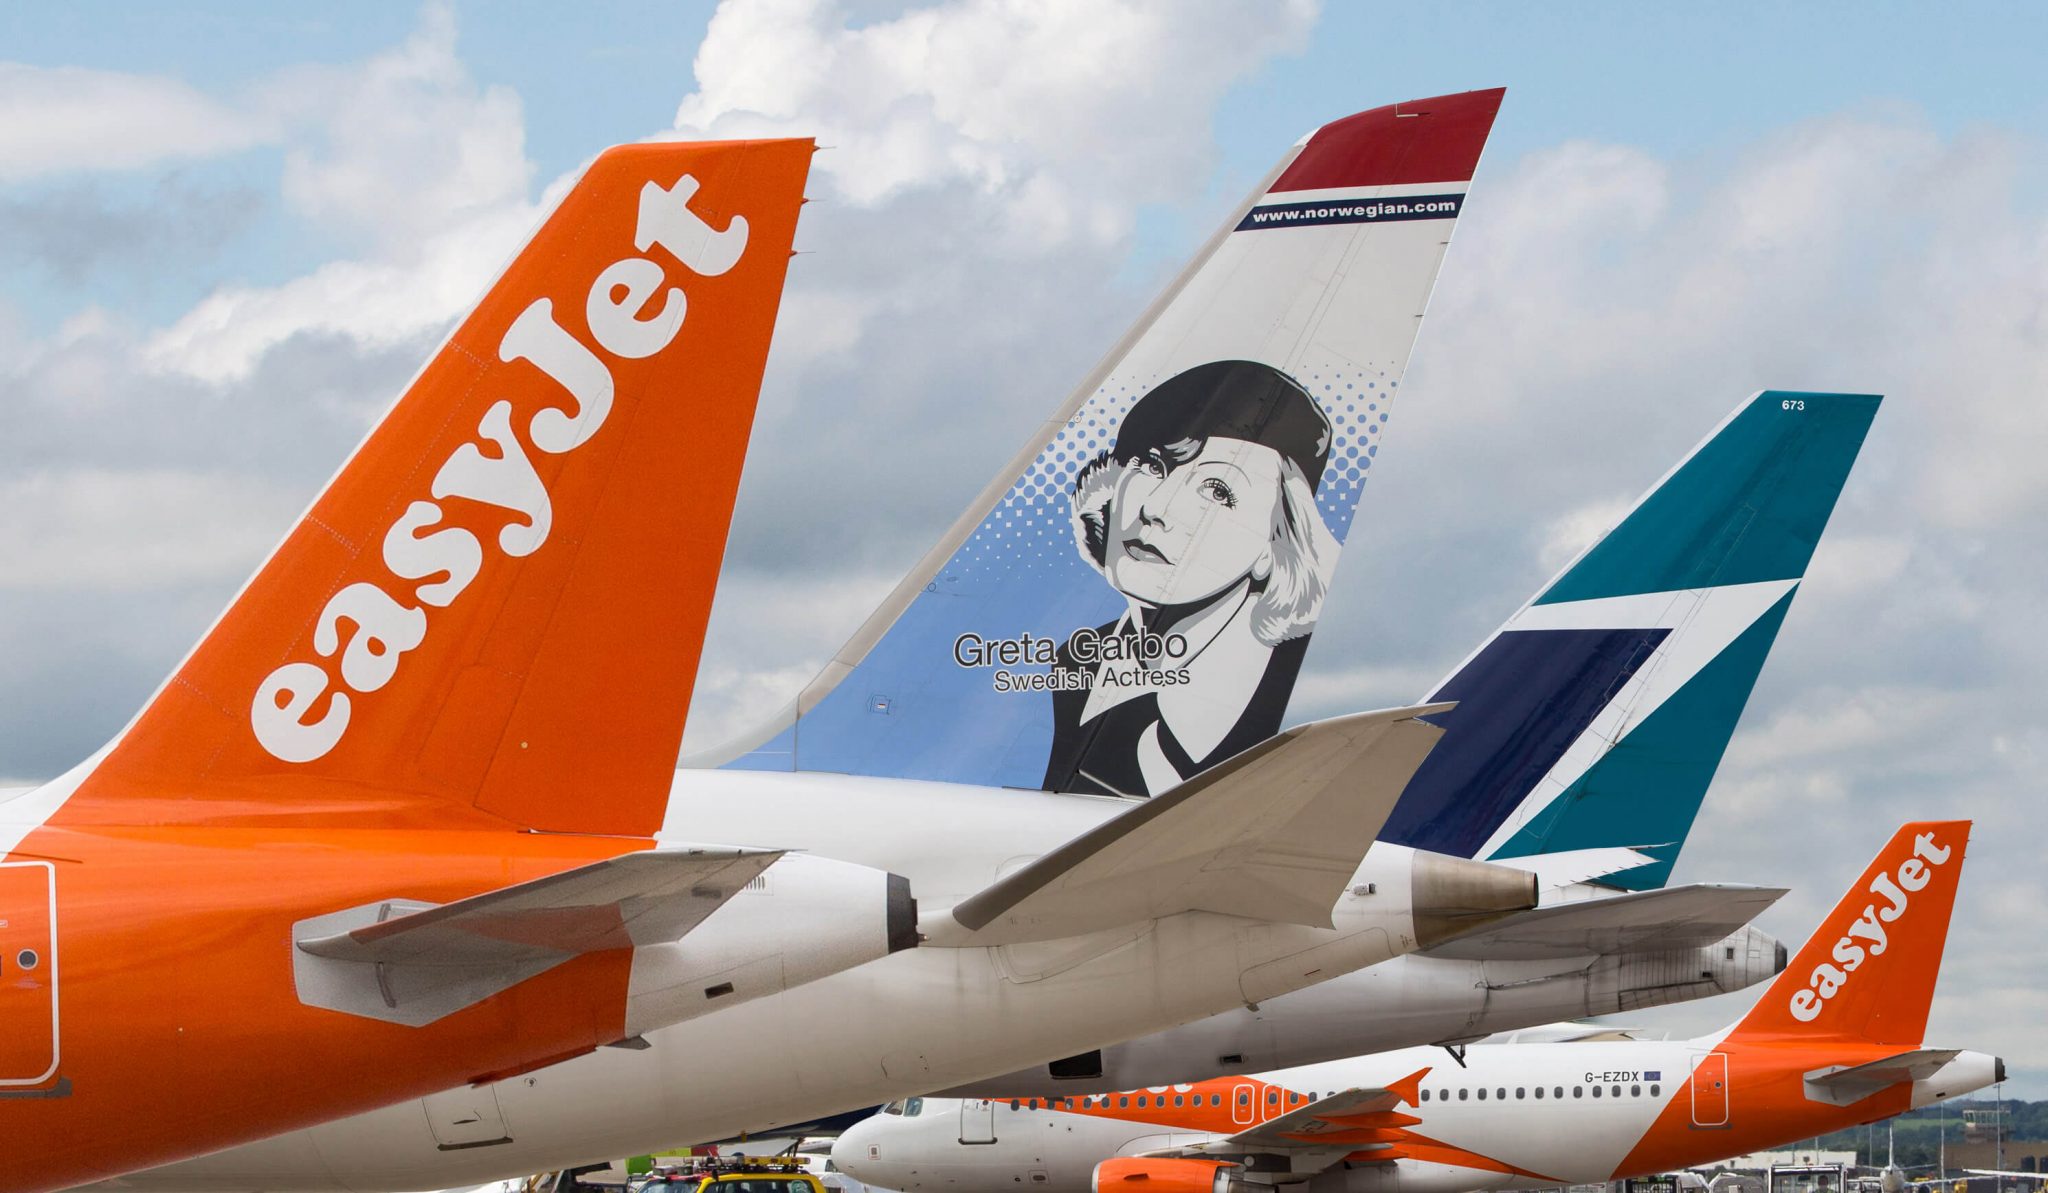 easyJet extends ‘Worldwide by easyJet’ to seven airports and adds new connections airline partners